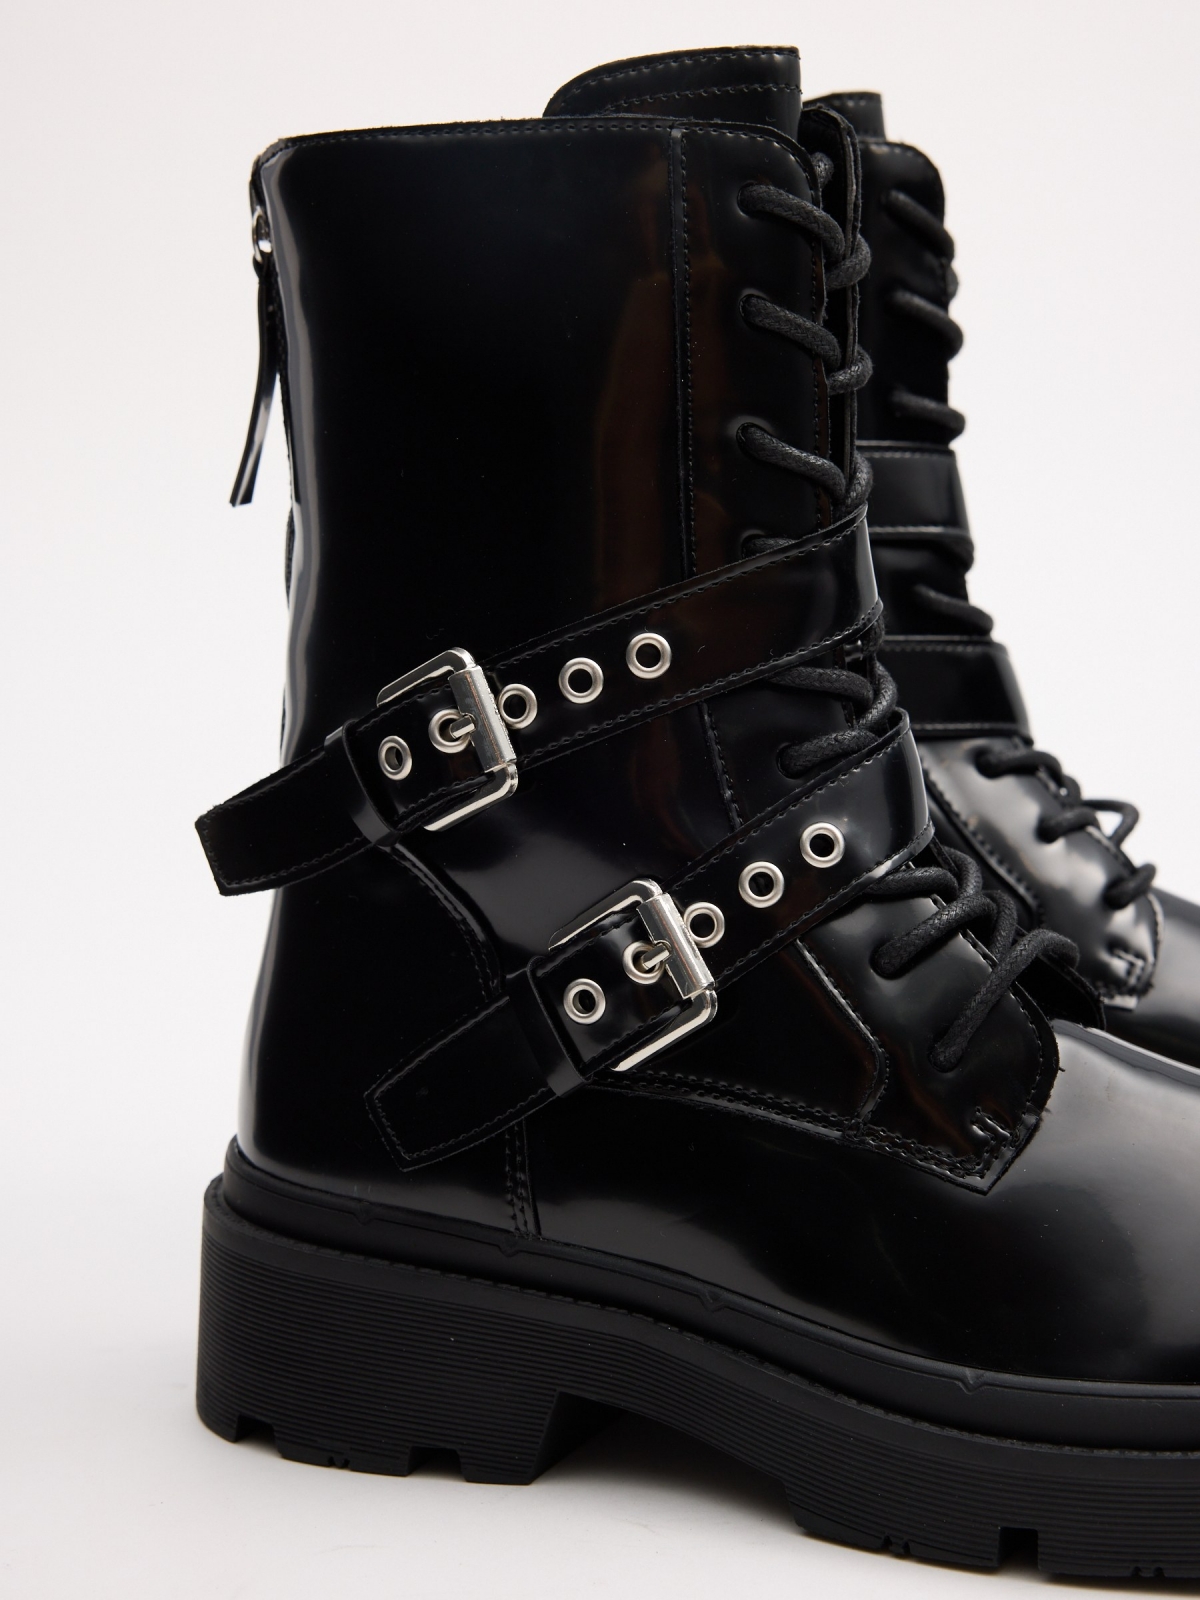 Fashion buckles ankle boots detail view